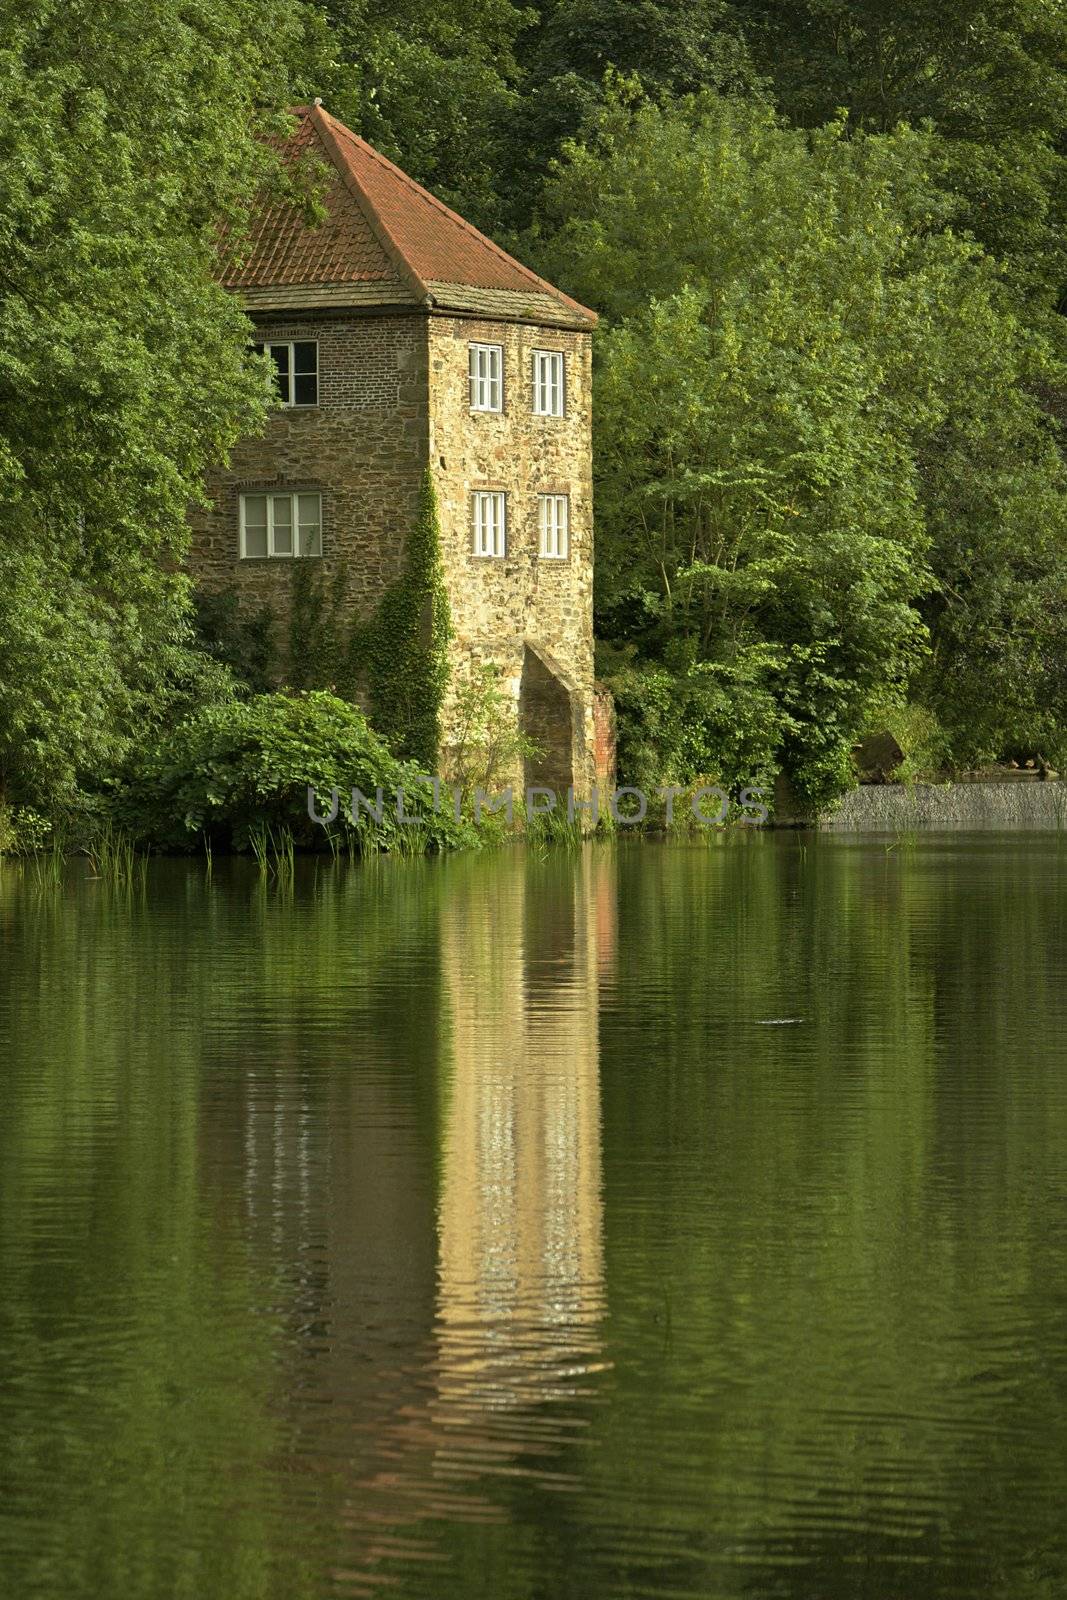 A Historic old Pump House on River Banks England